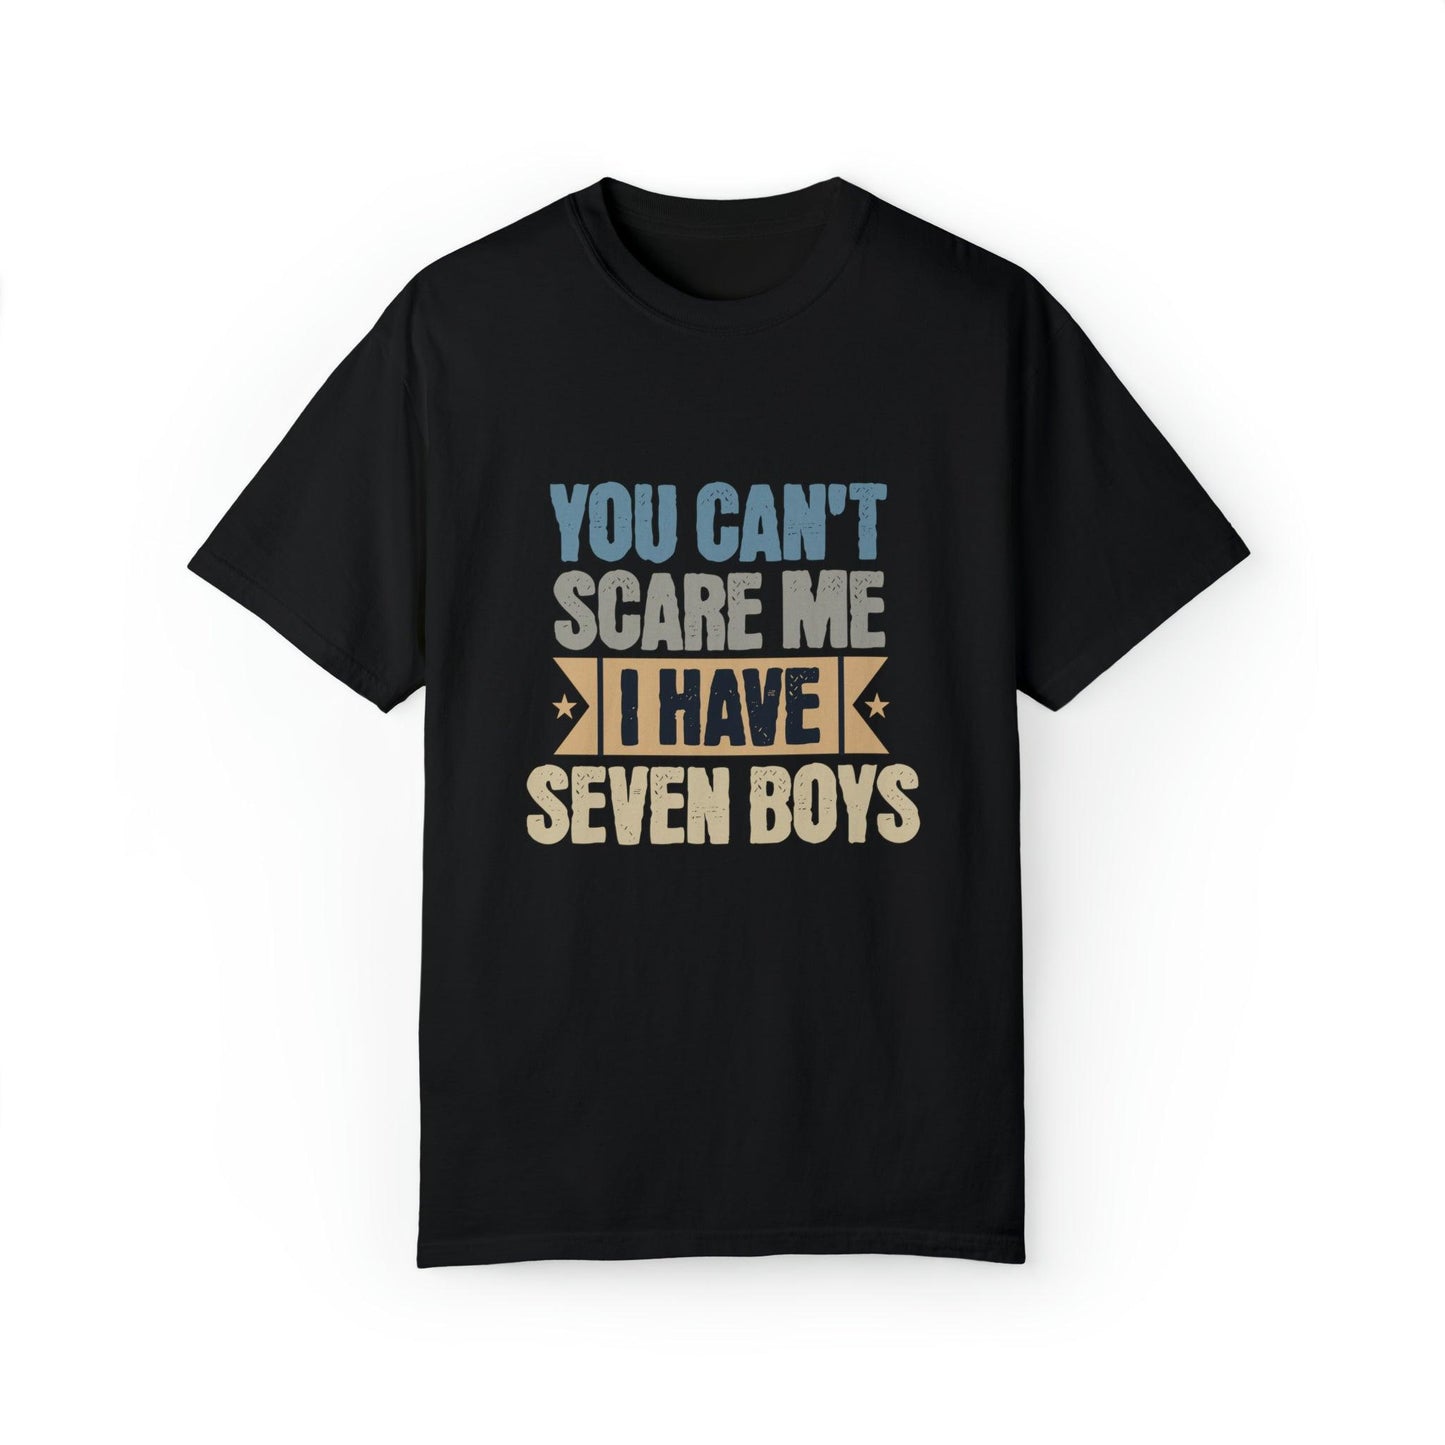 You Can't Scare Me, I Have 7 Boys: Proud Mama T-Shirt - Pandaize